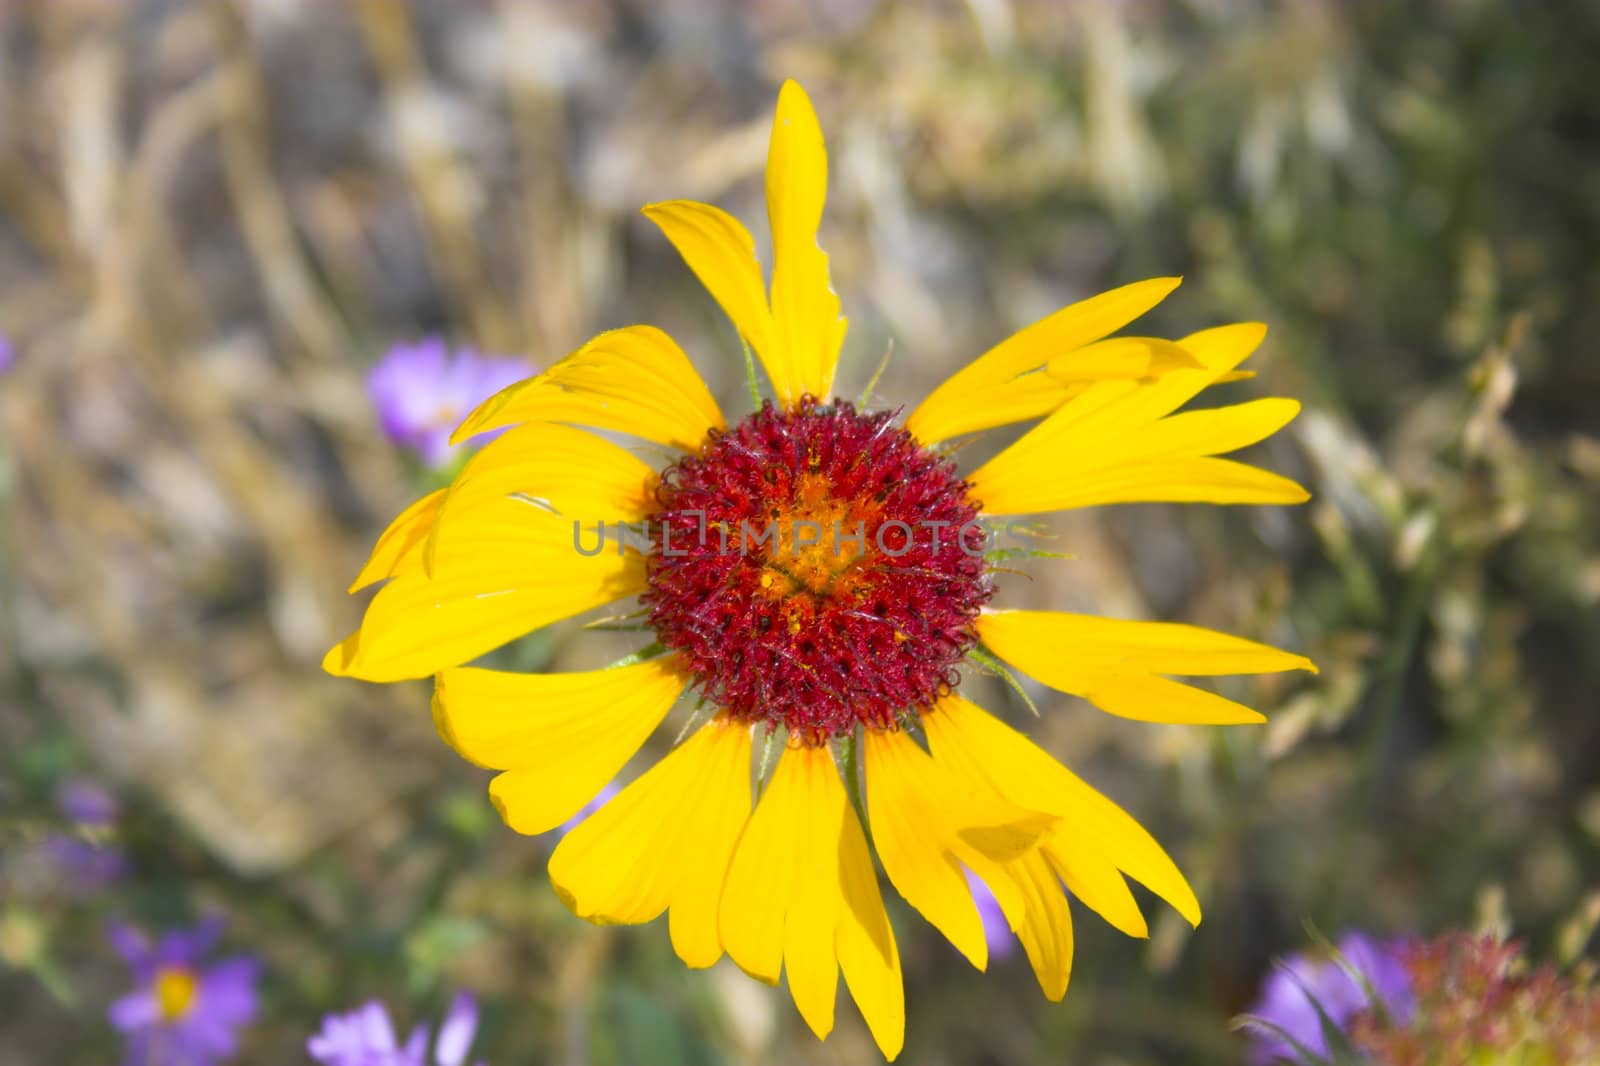 Sunny prairie meadows blooming with black-eyed Suzy flowers